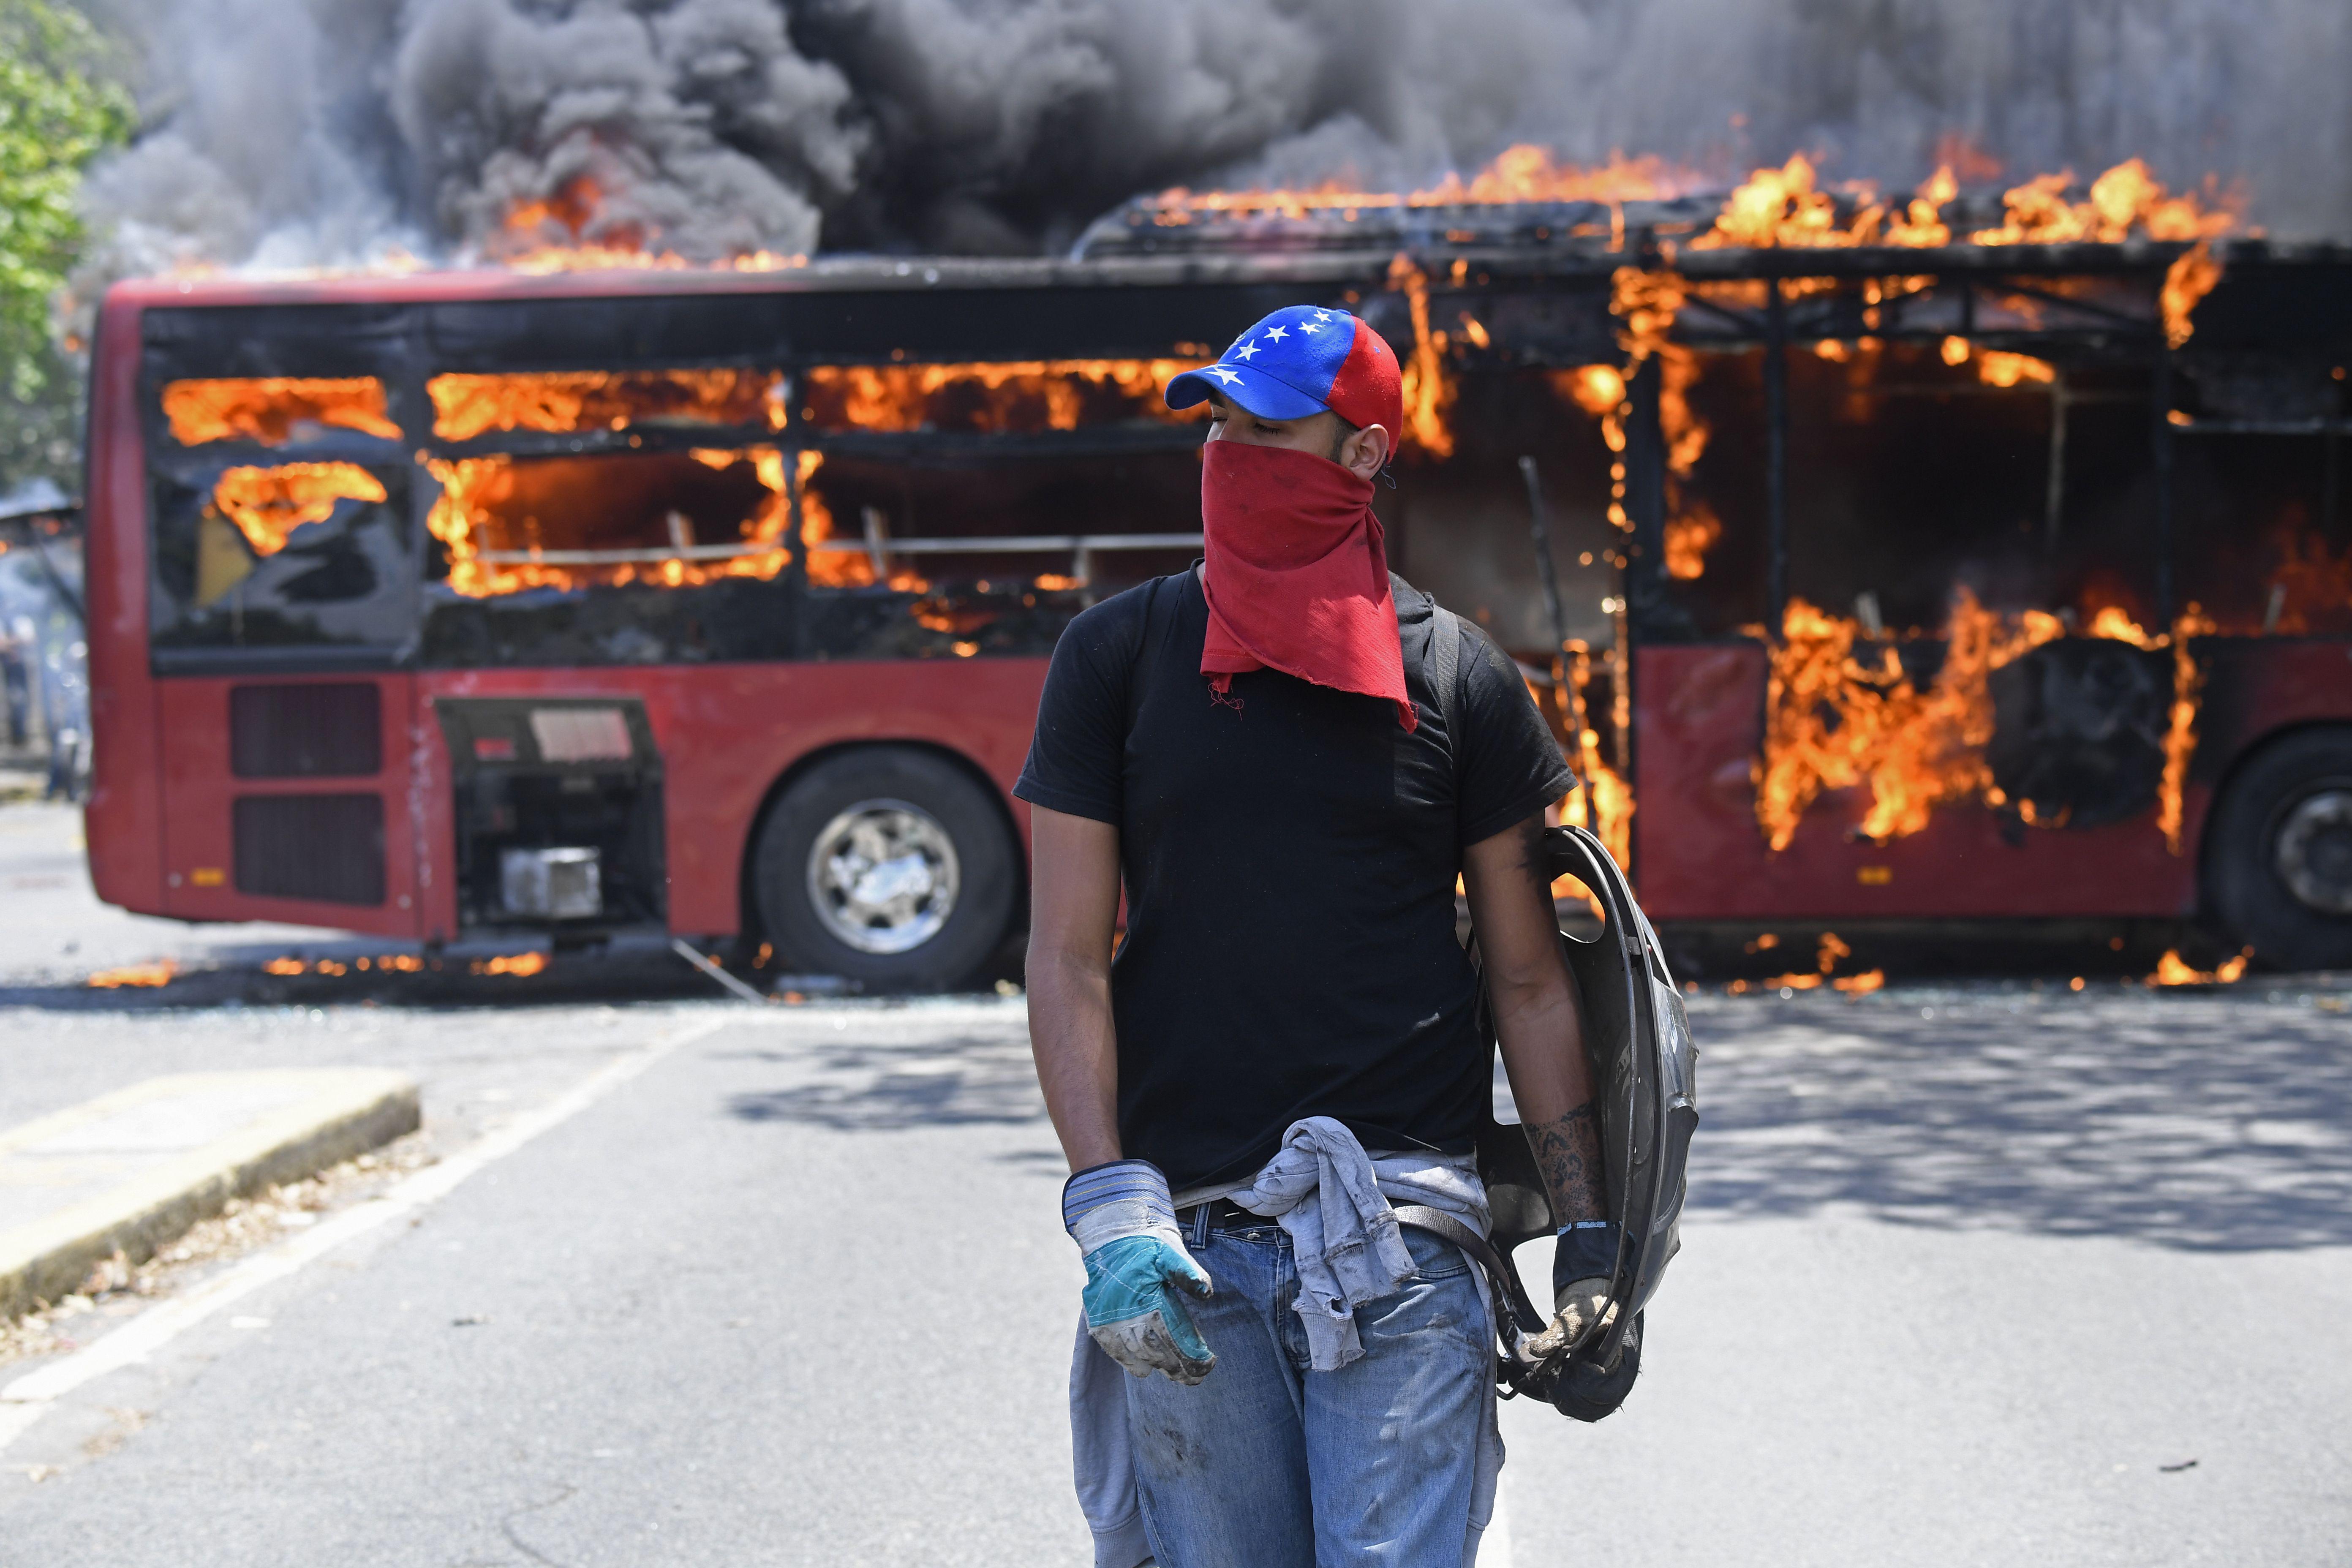 An opposition demonstrator wearing a hat and a cloth over his face walks in front of a burning bus.